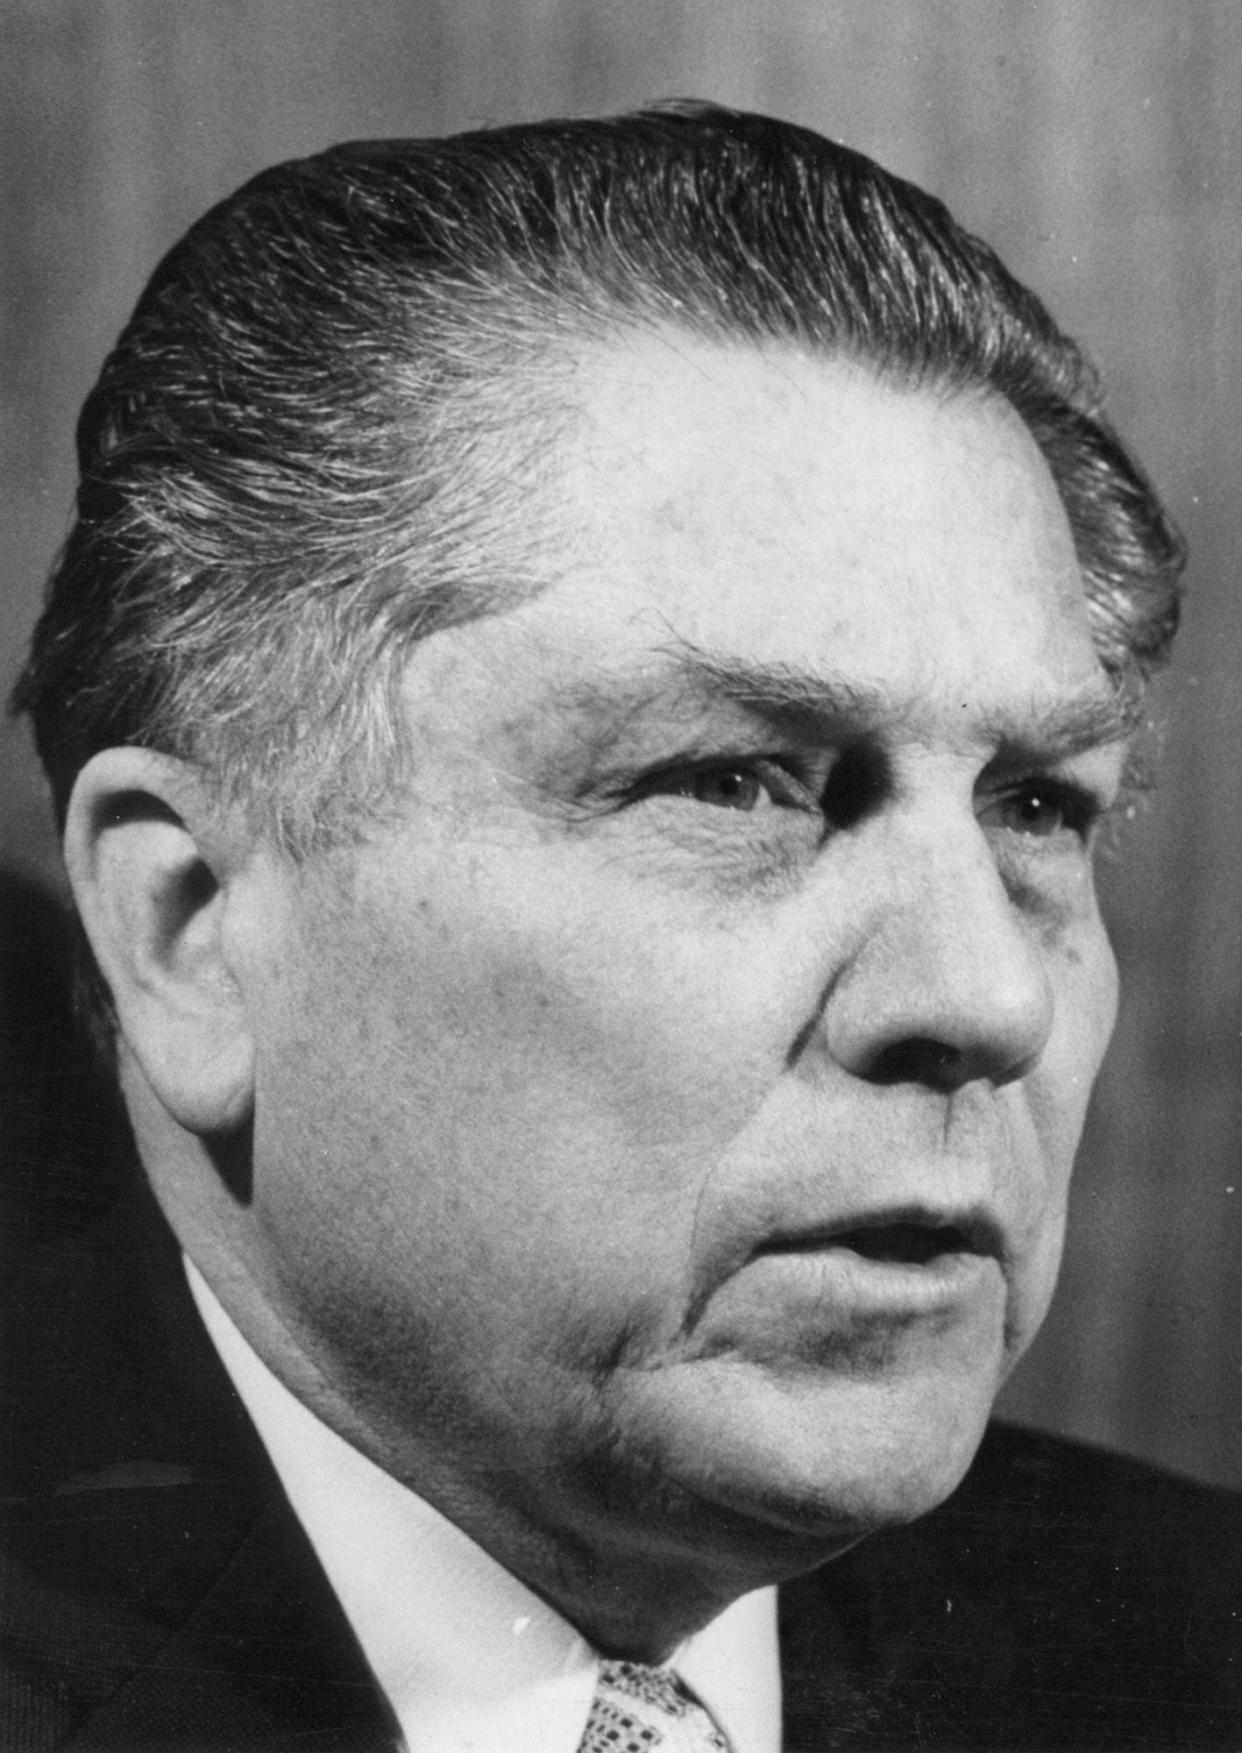 Jimmy Hoffa is shown in this 1975 file photo. Hoffa, father of current Teamsters President James P. Hoffa, disappeared from the parking lot of the Machus Red Fox restaurant in Michigan in July 1975.